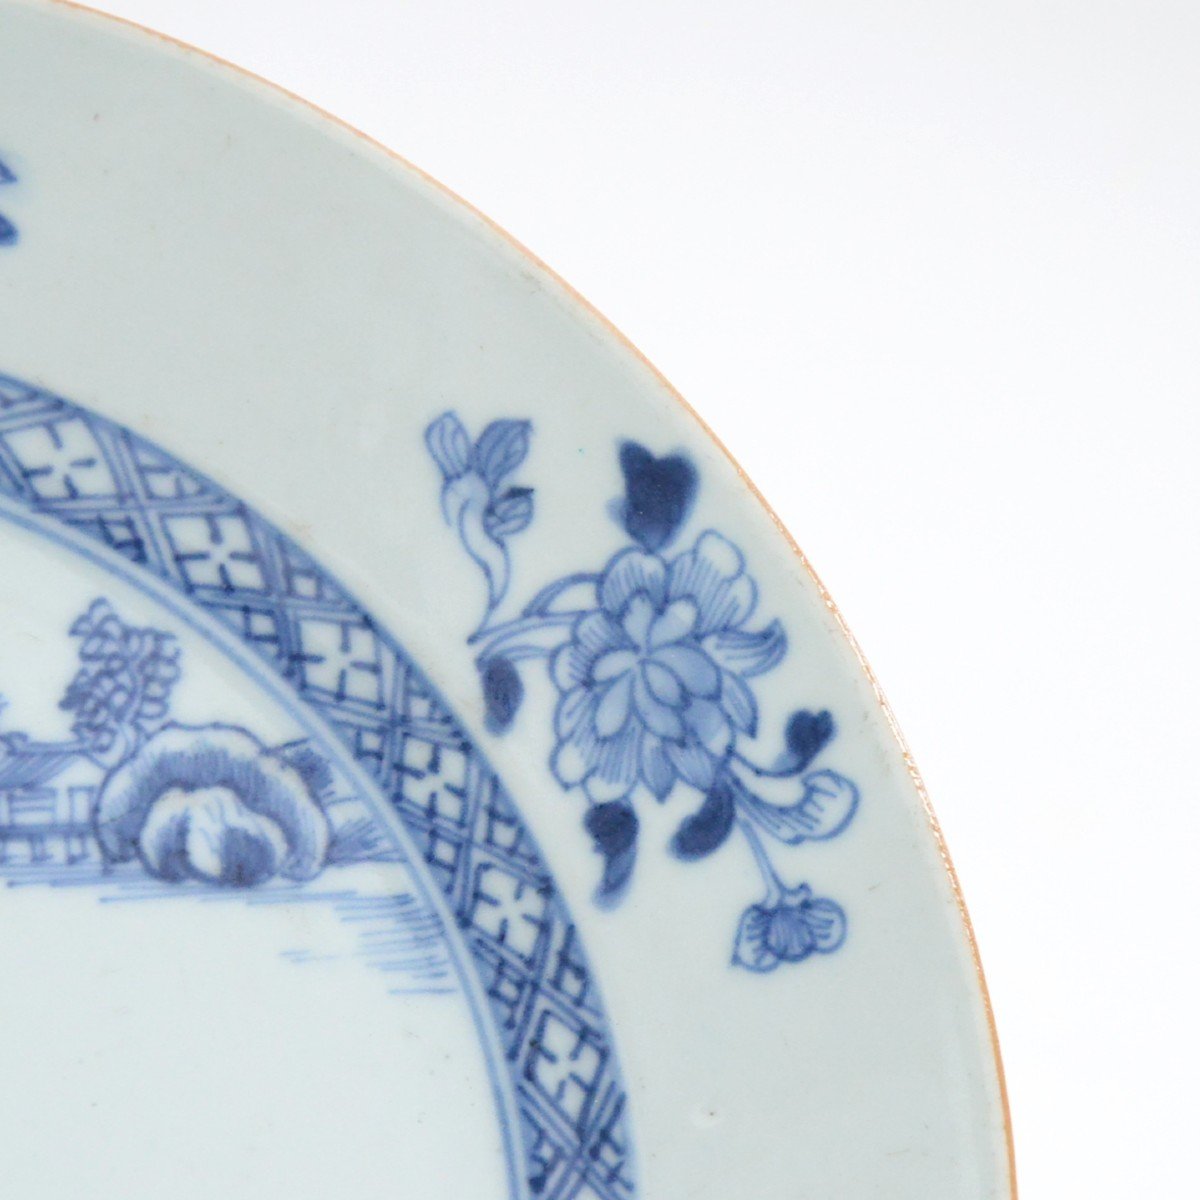 Suite Of Eight Export Chinese Porcelain Plates With Blue And White Decor 18th Century-photo-4